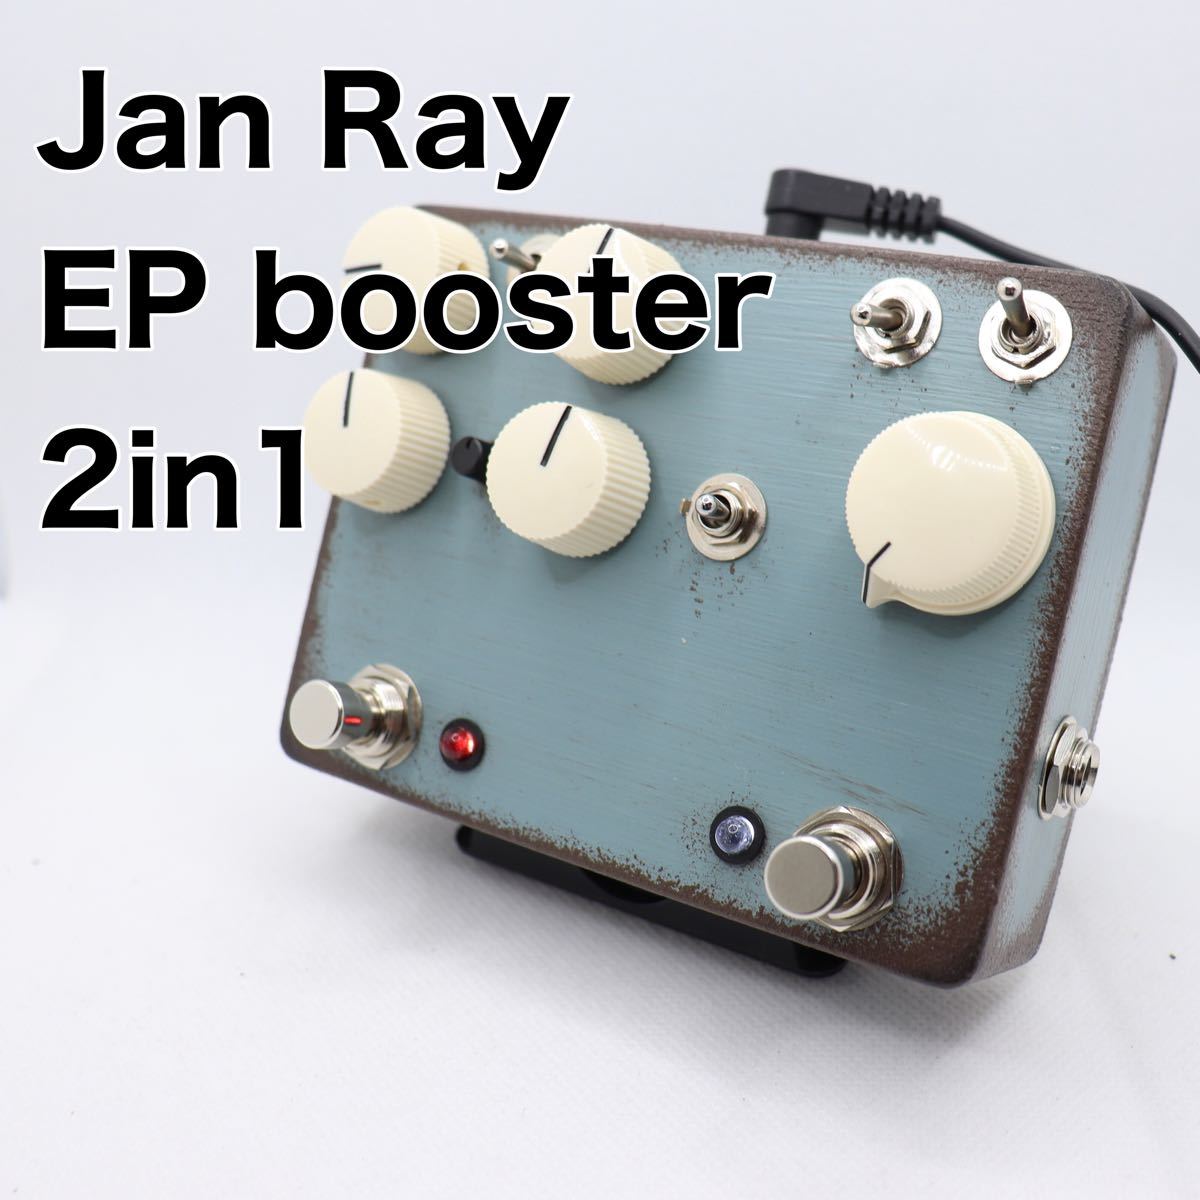 Jan Ray + EP booster 2in1